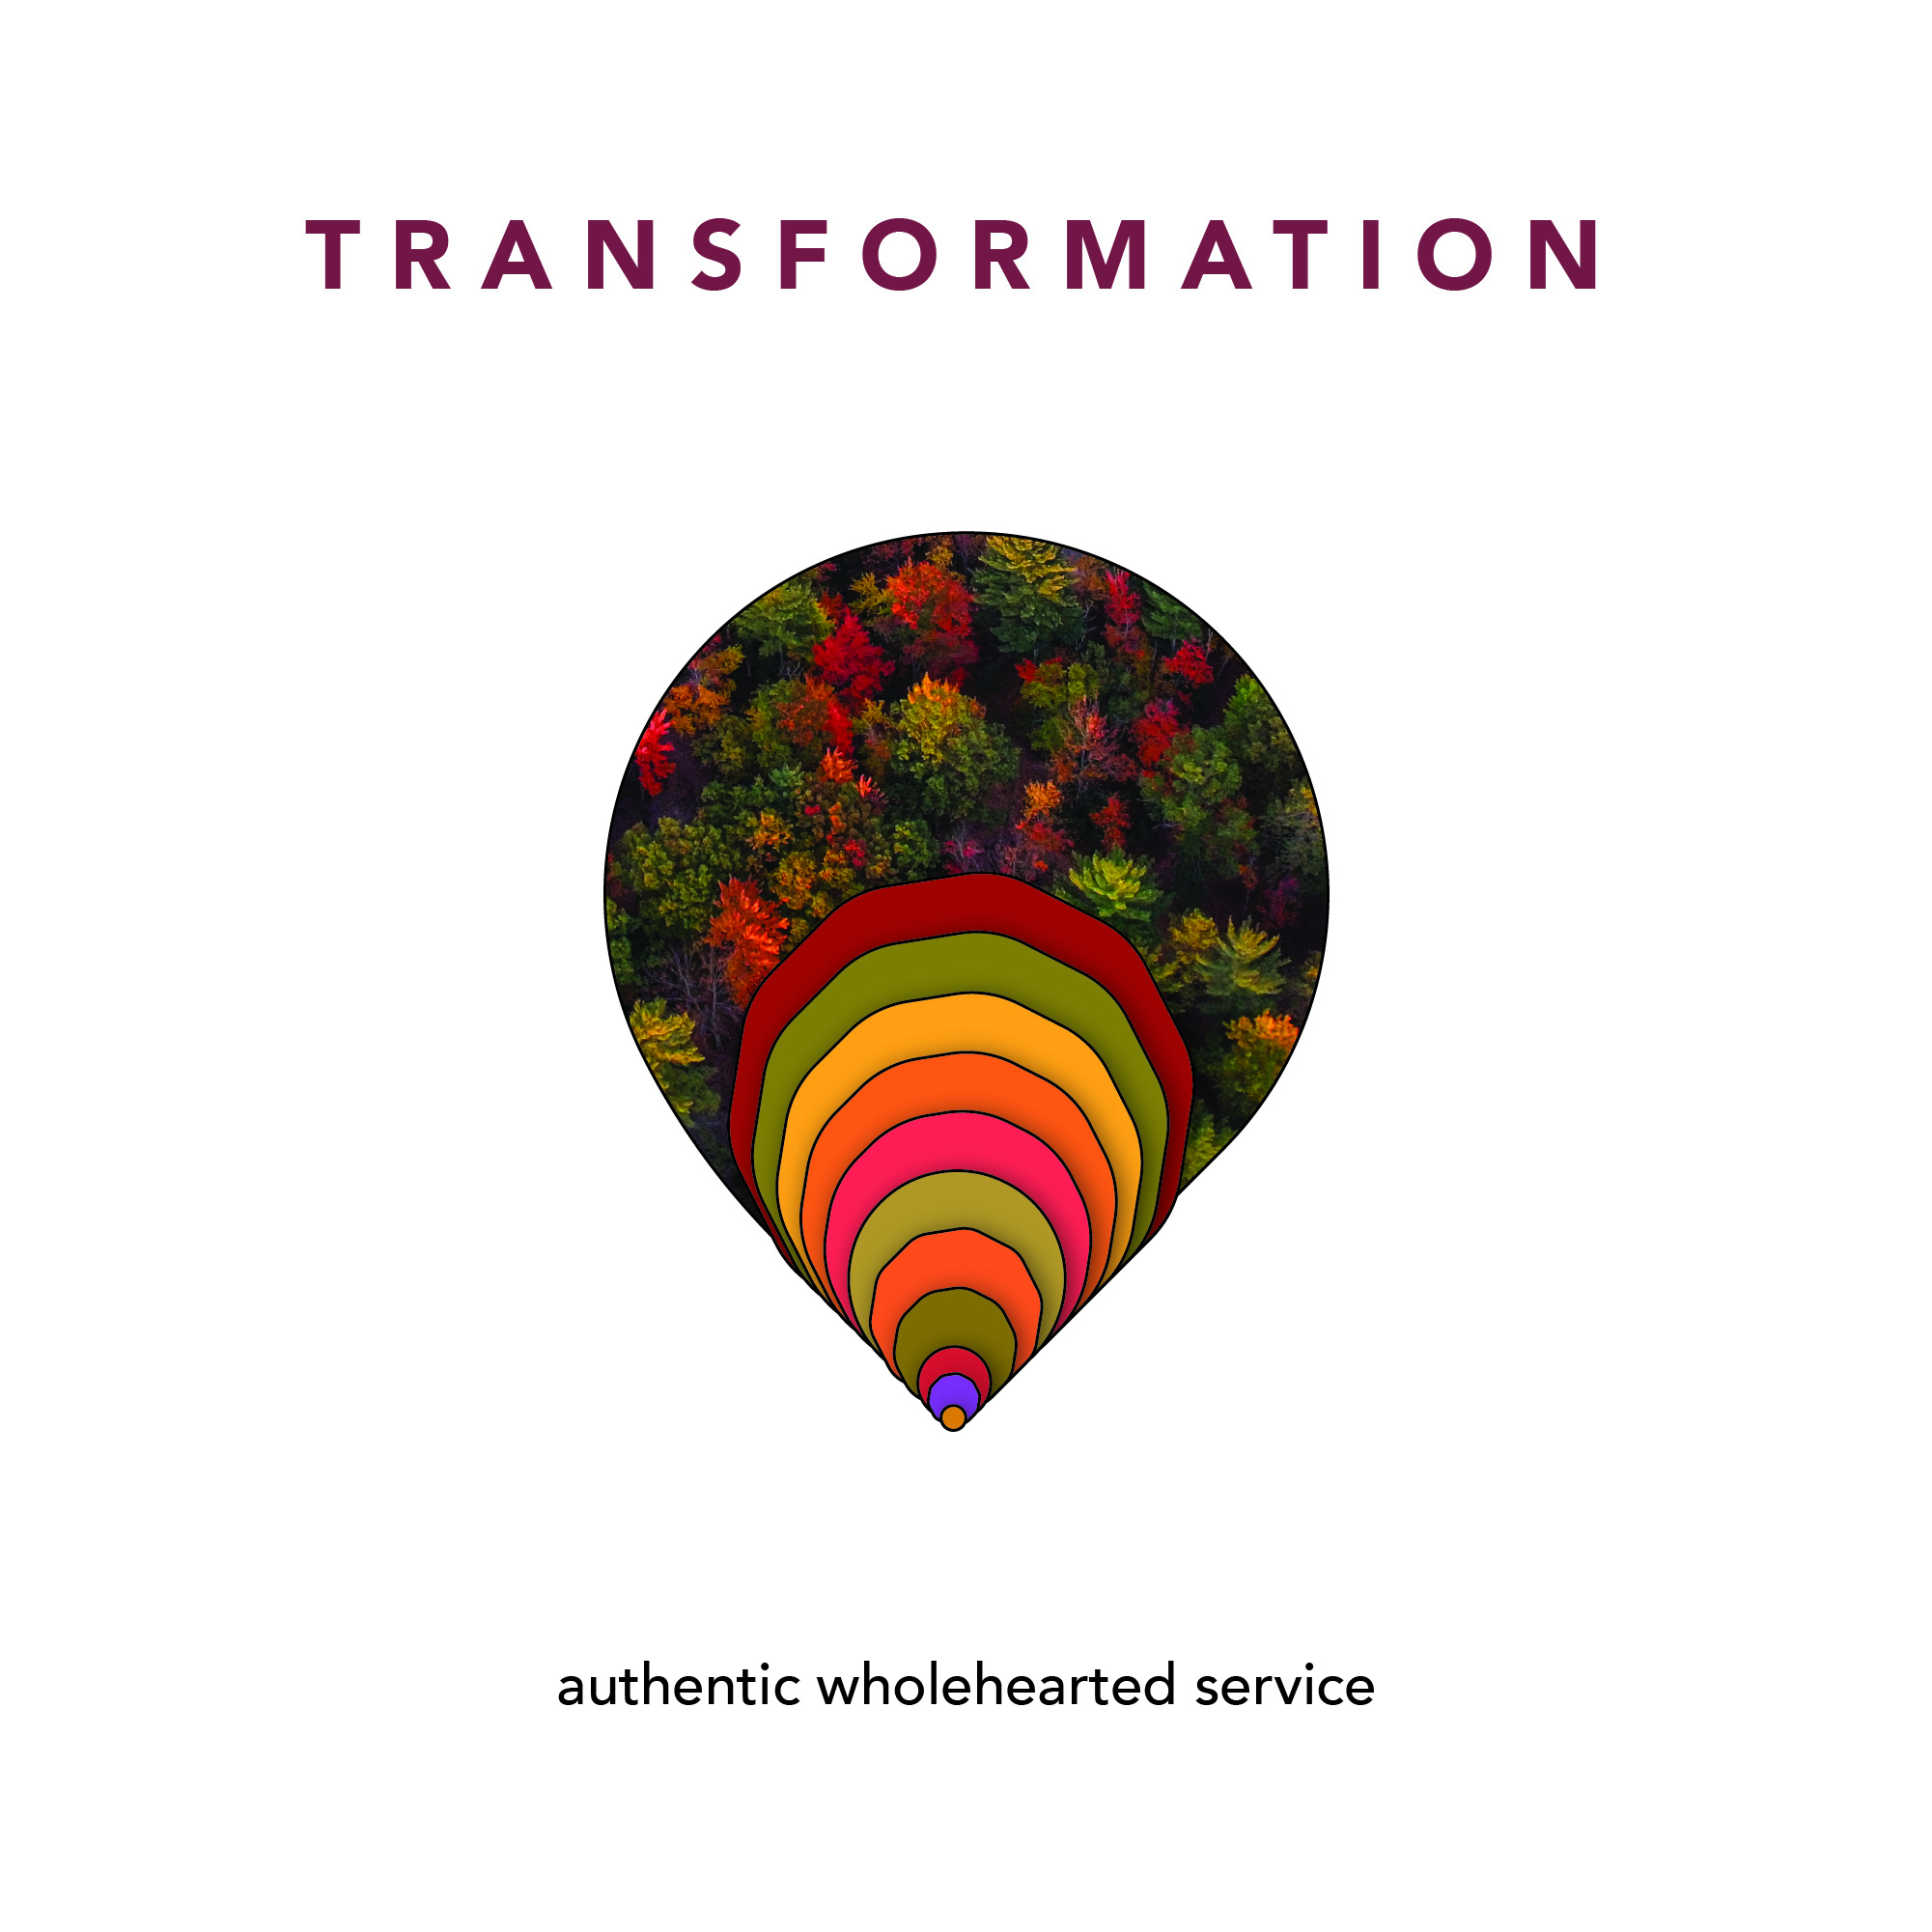 TRANSFORMATION - authentic wholehearted service with loving boundaries